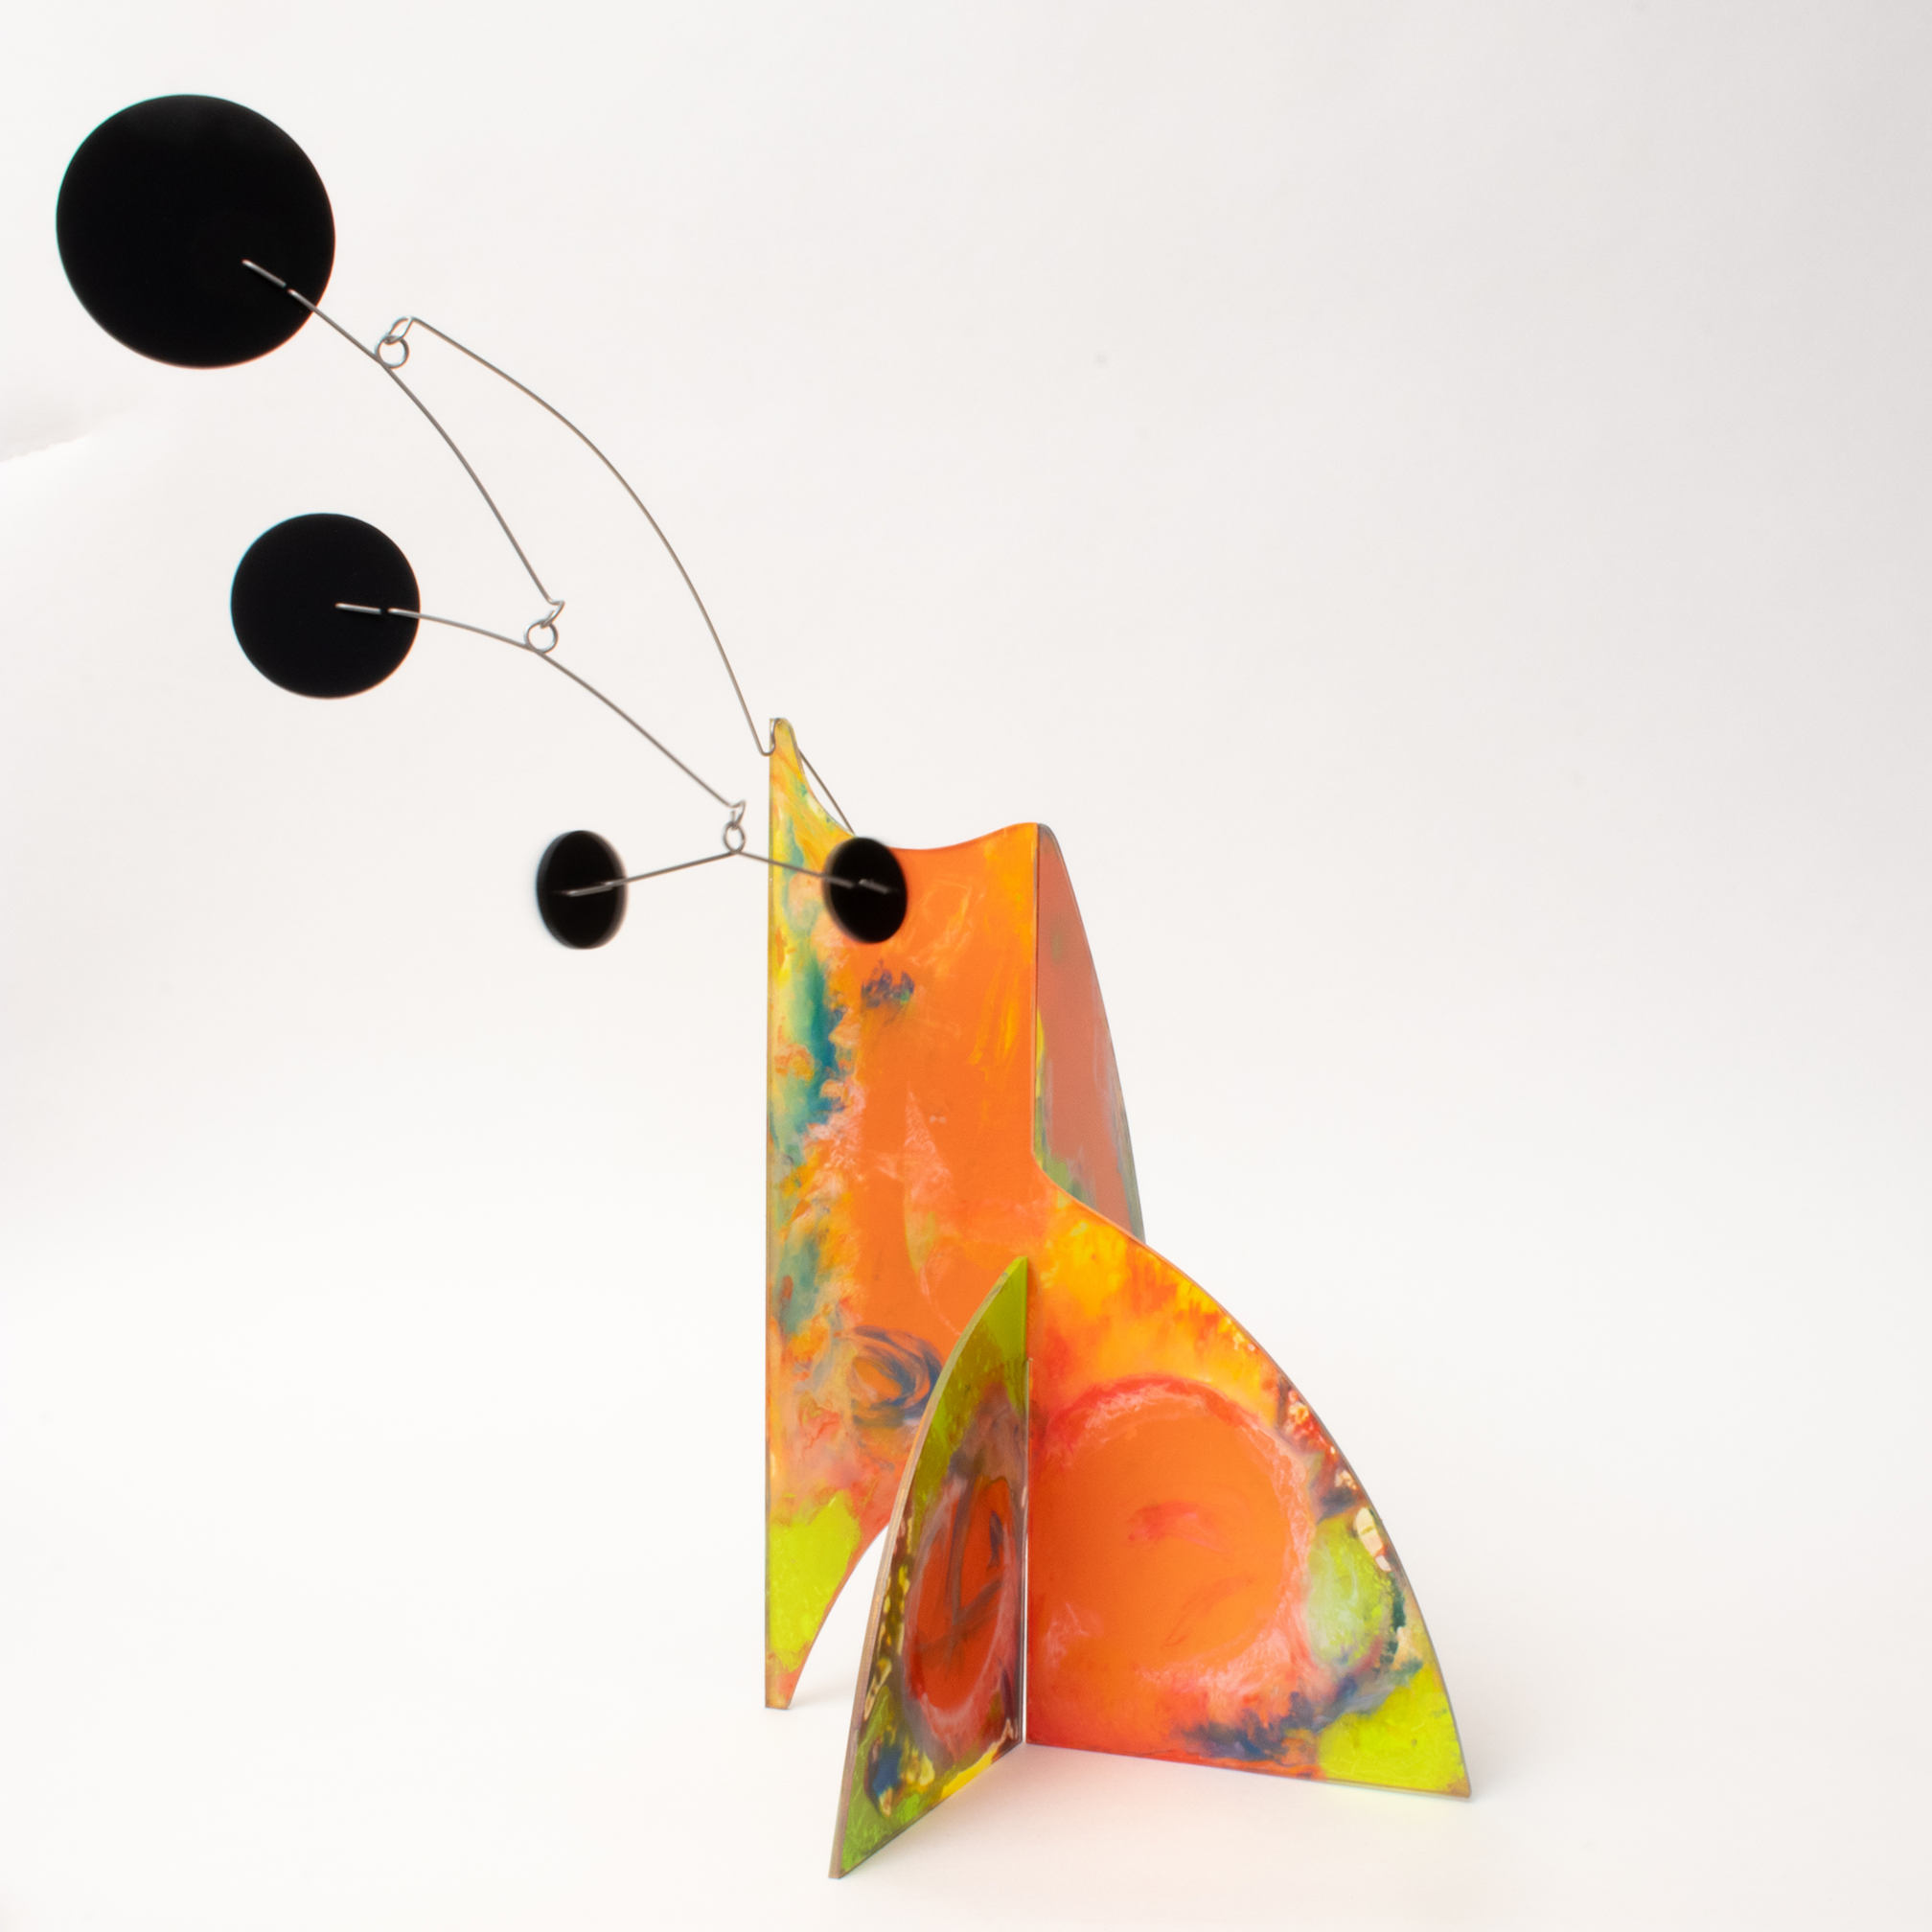 Eloquent Hand Painted Stabile Sculpture #7 - Atomic Mobiles Fine Art